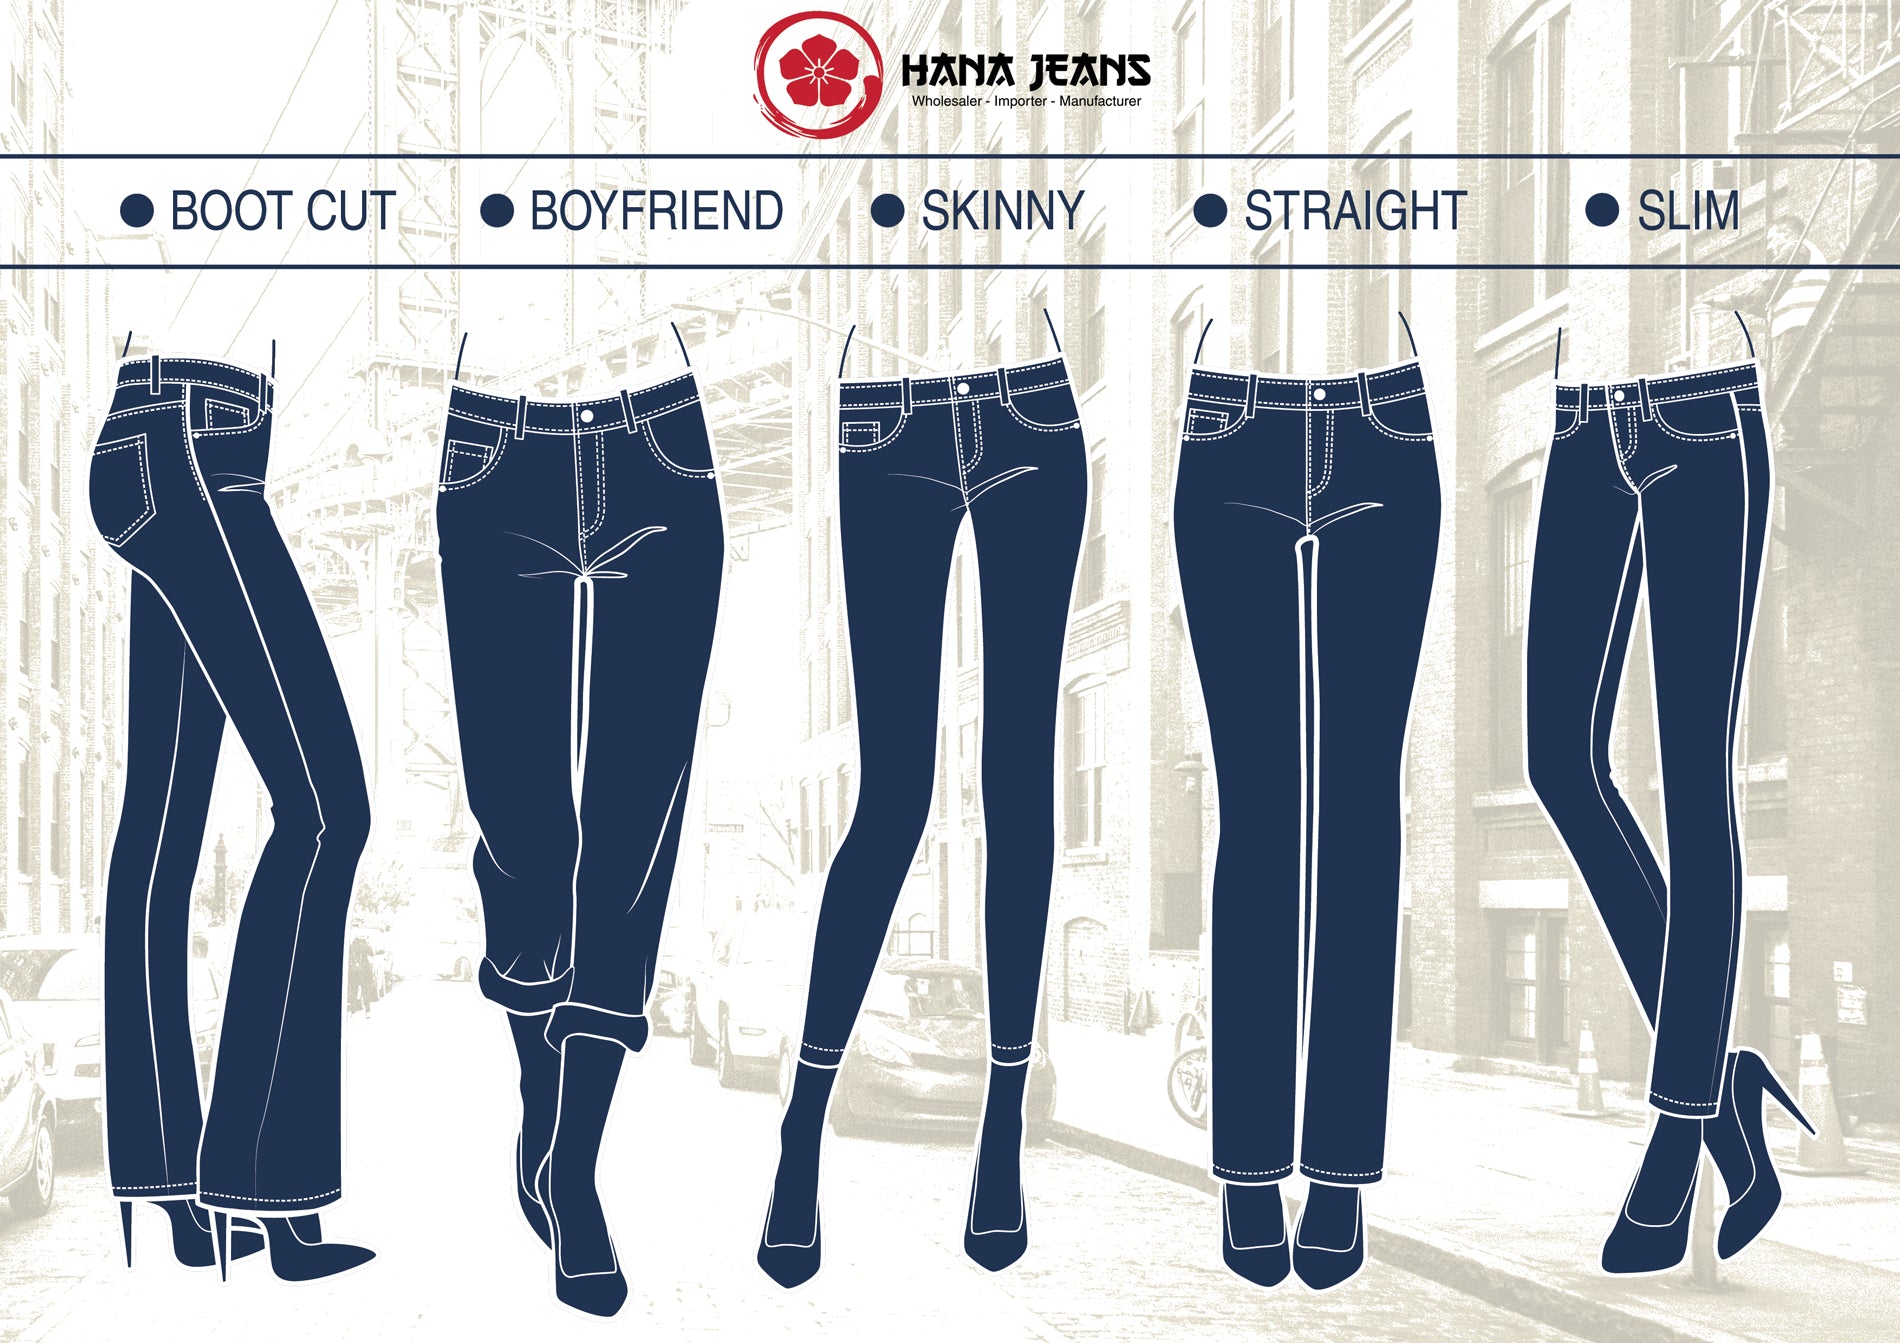 Difference in “cuts” and styles of Denim Jeans image pic